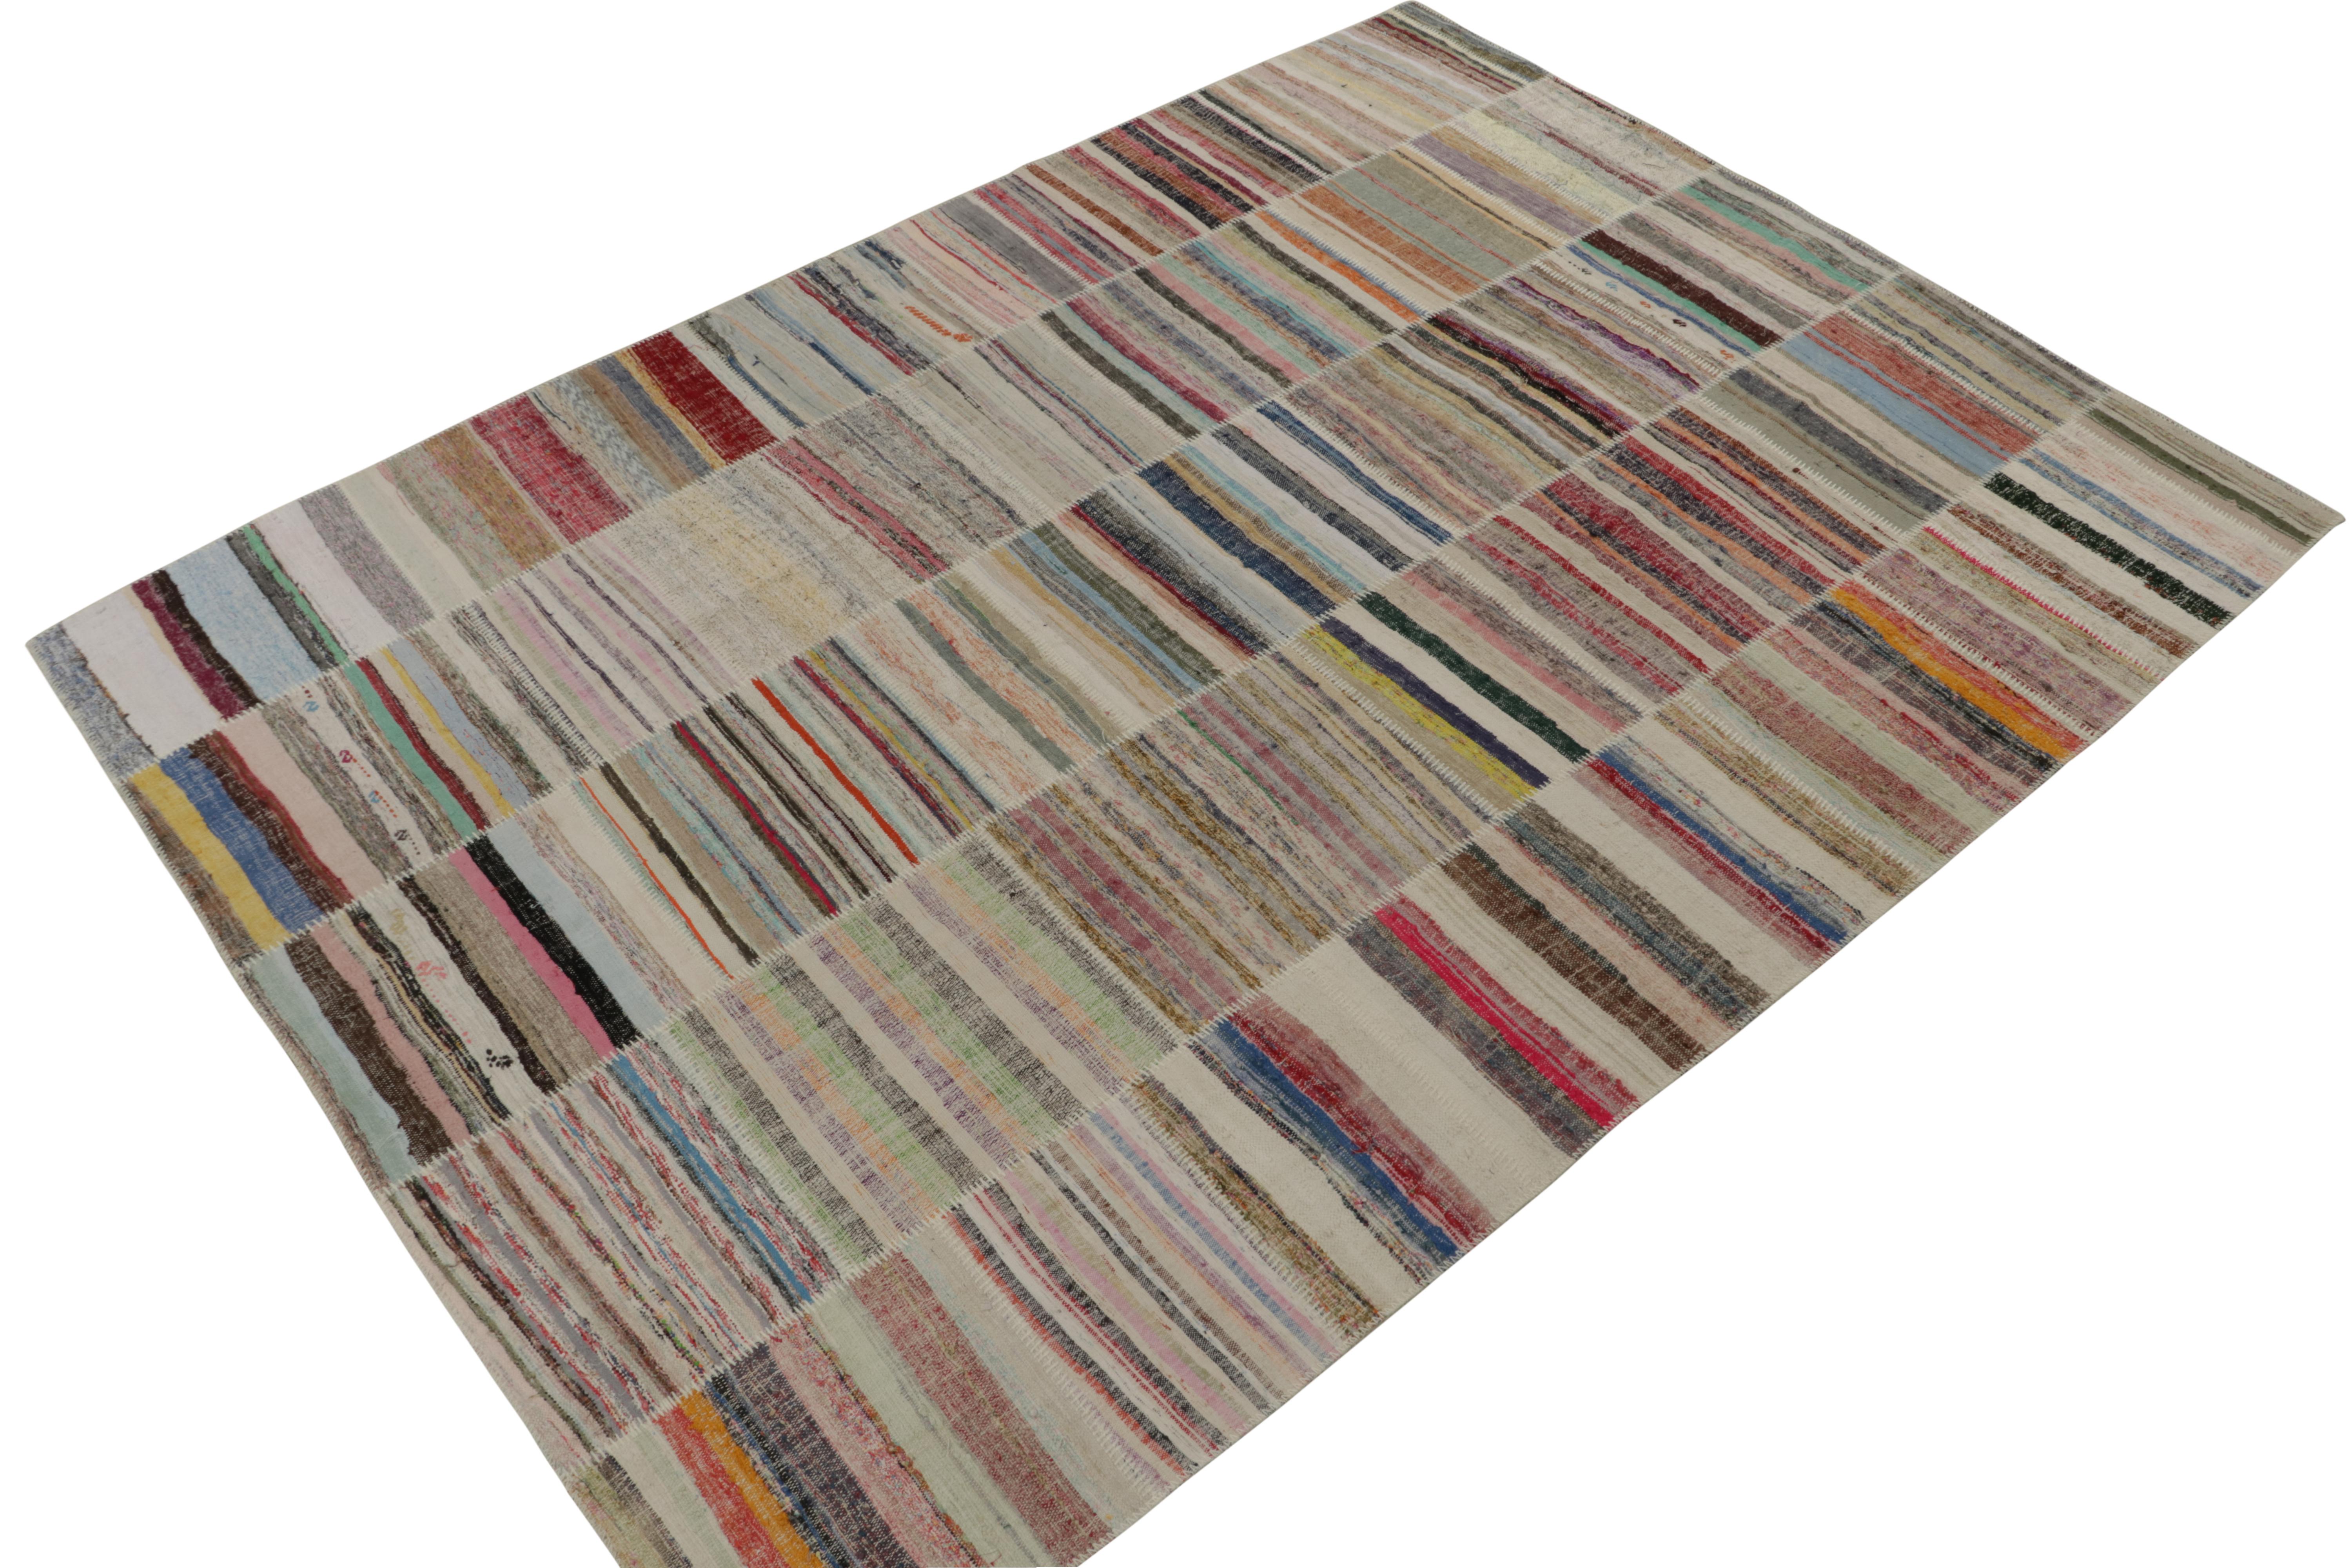 Handwoven in wool, Rug & Kilim presents a spacious 9x12 contemporary rug from their innovative new patchwork kilim collection. 

On the design: 

This flat weave technique repurposes vintage yarns in polychromatic stripes and striae, achieving a